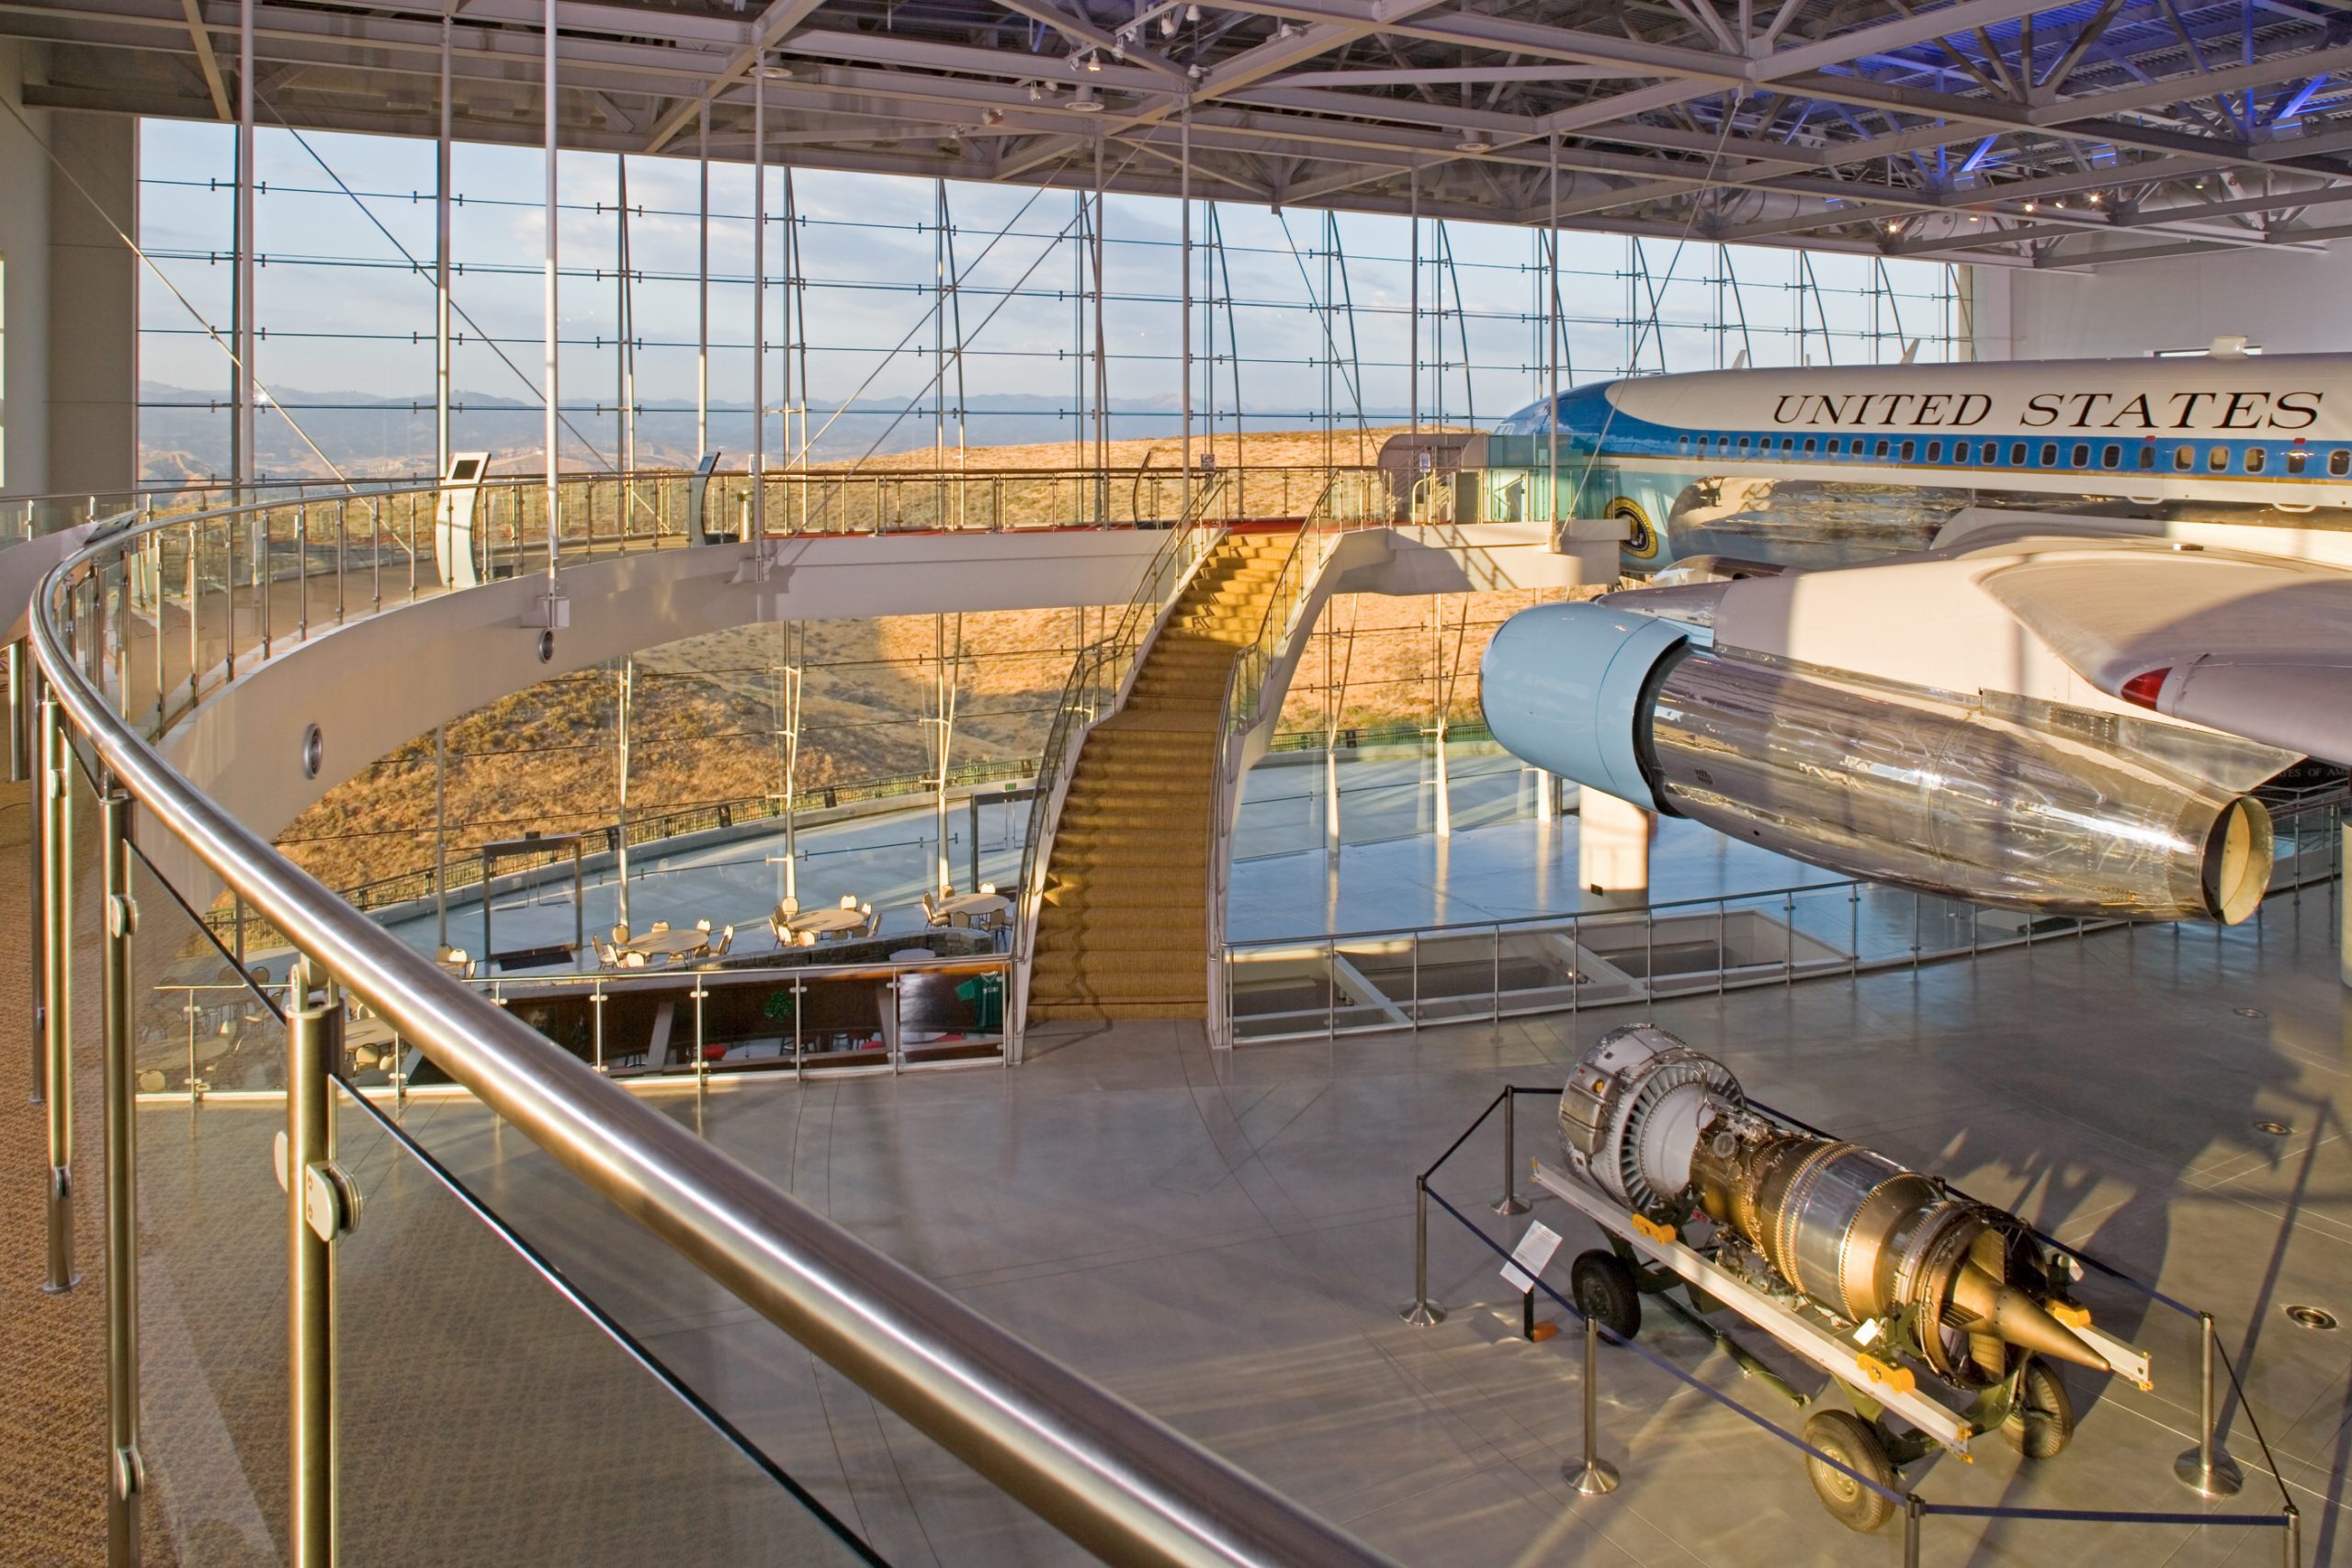 Air Force One Pavilion – Ronald Reagan Presidential Library